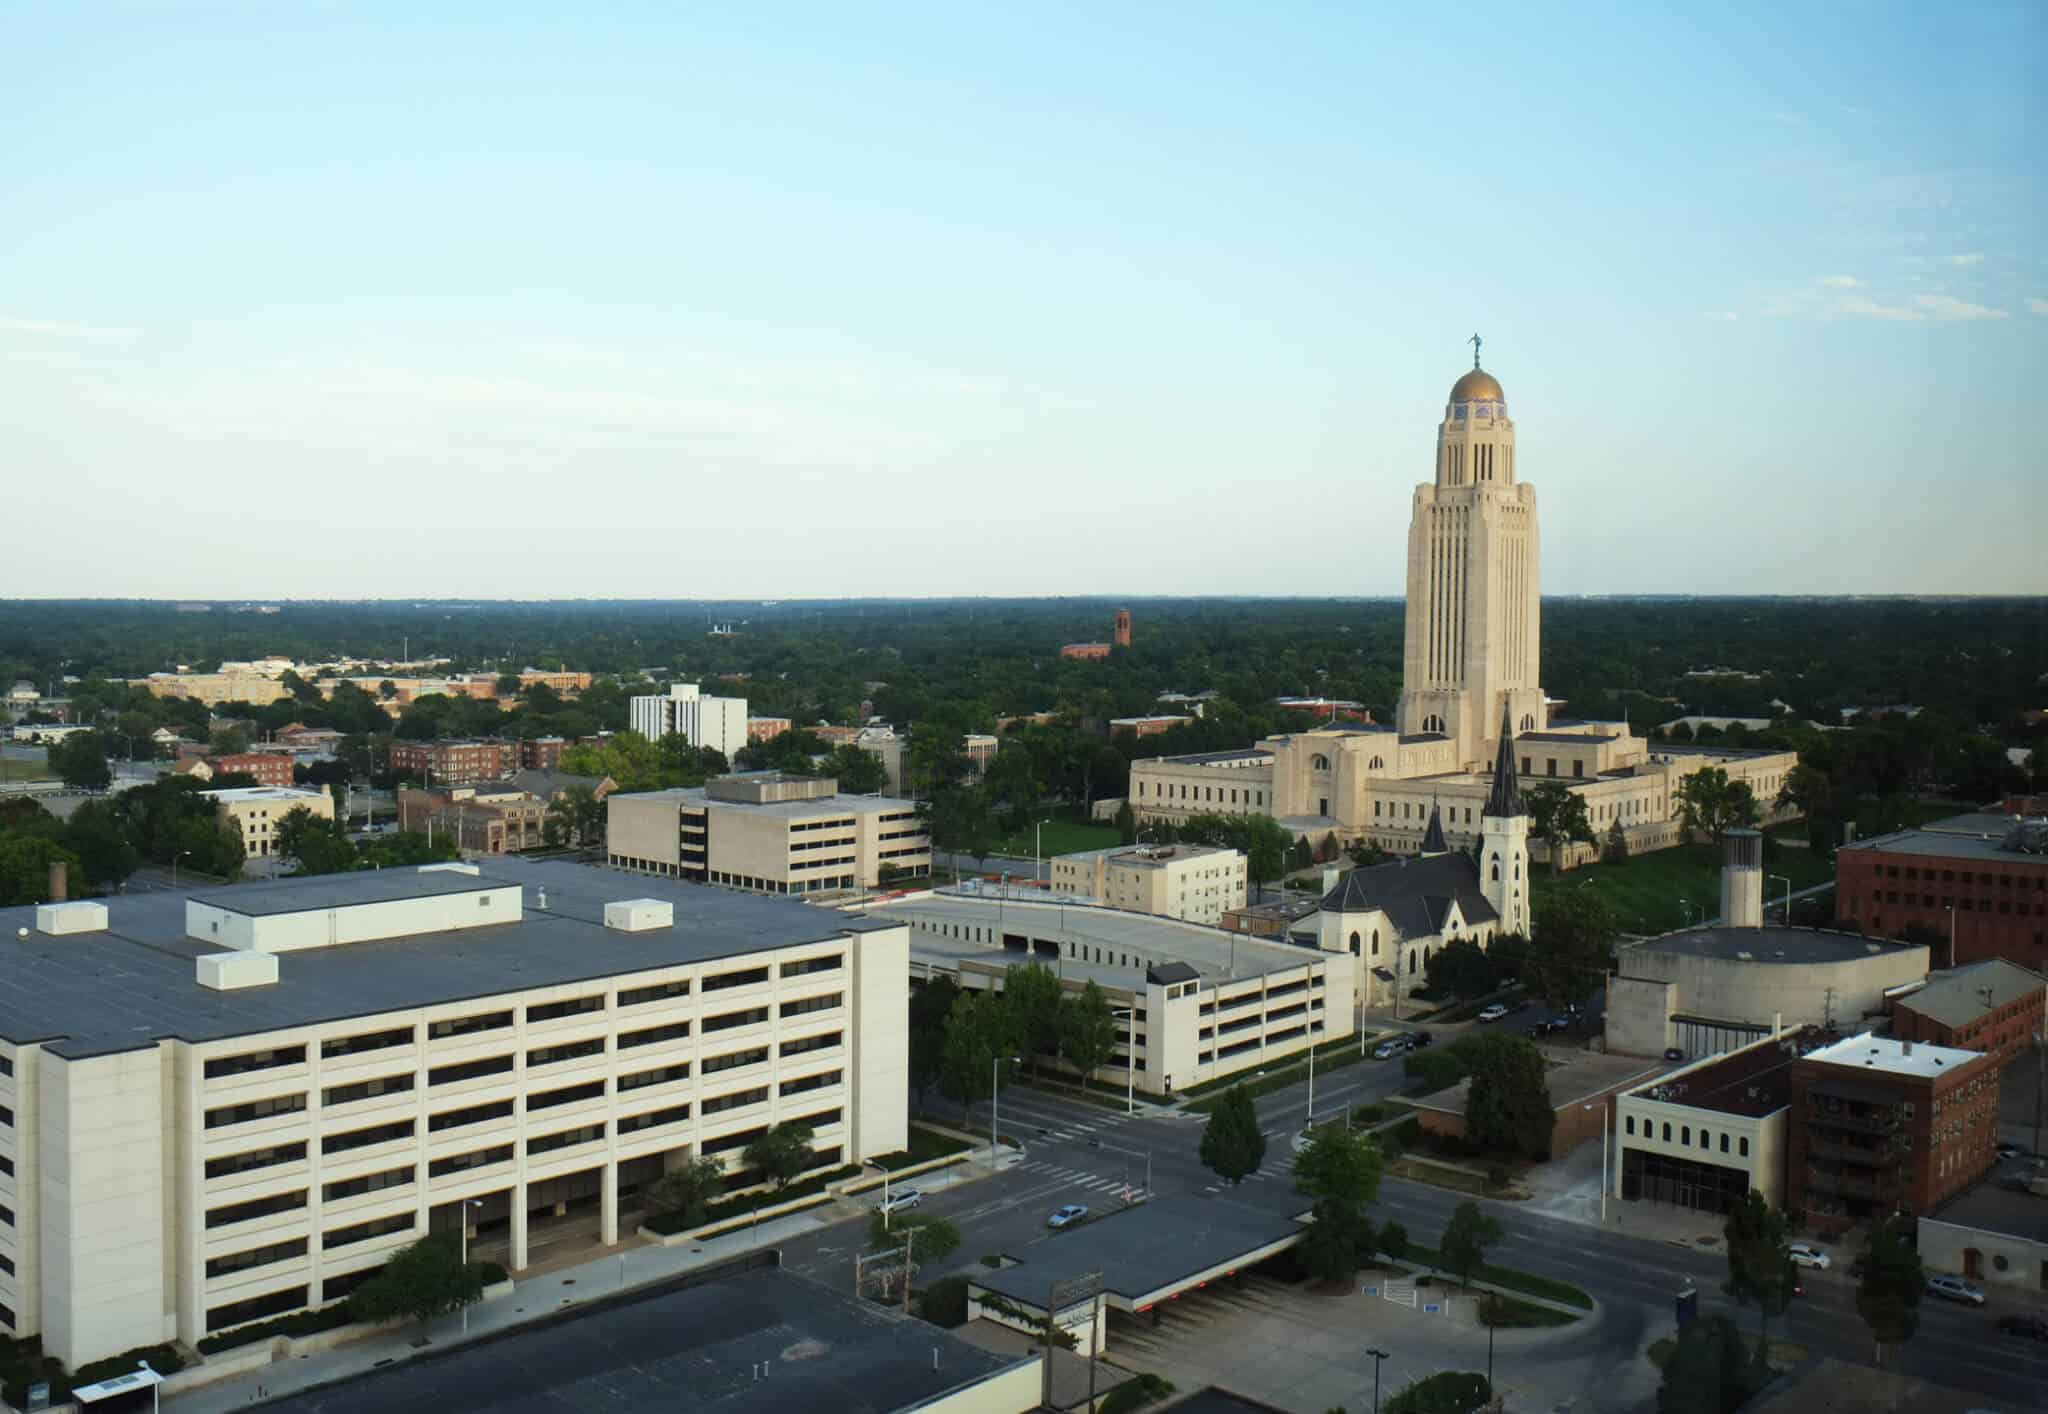 Elevated view of Nebraska State Capitol and surroundings.